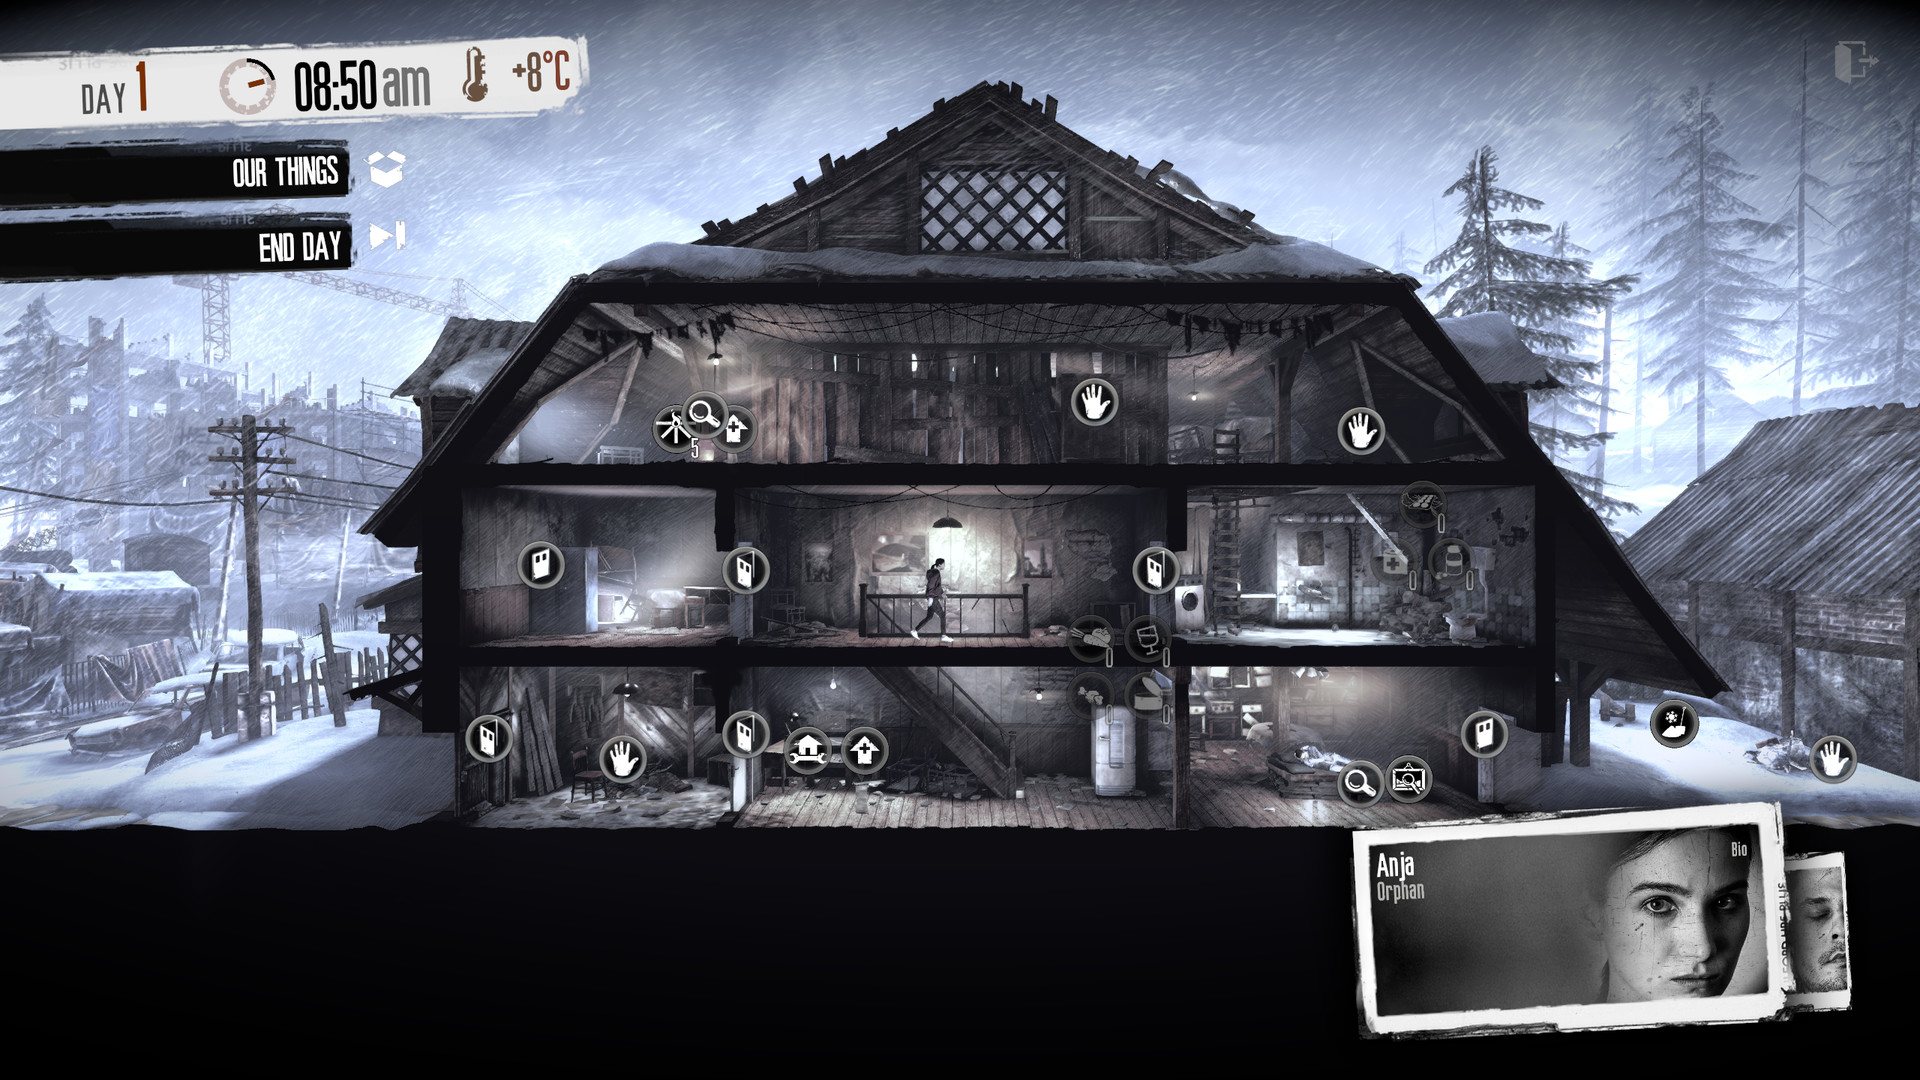 download this war of mine complete edition